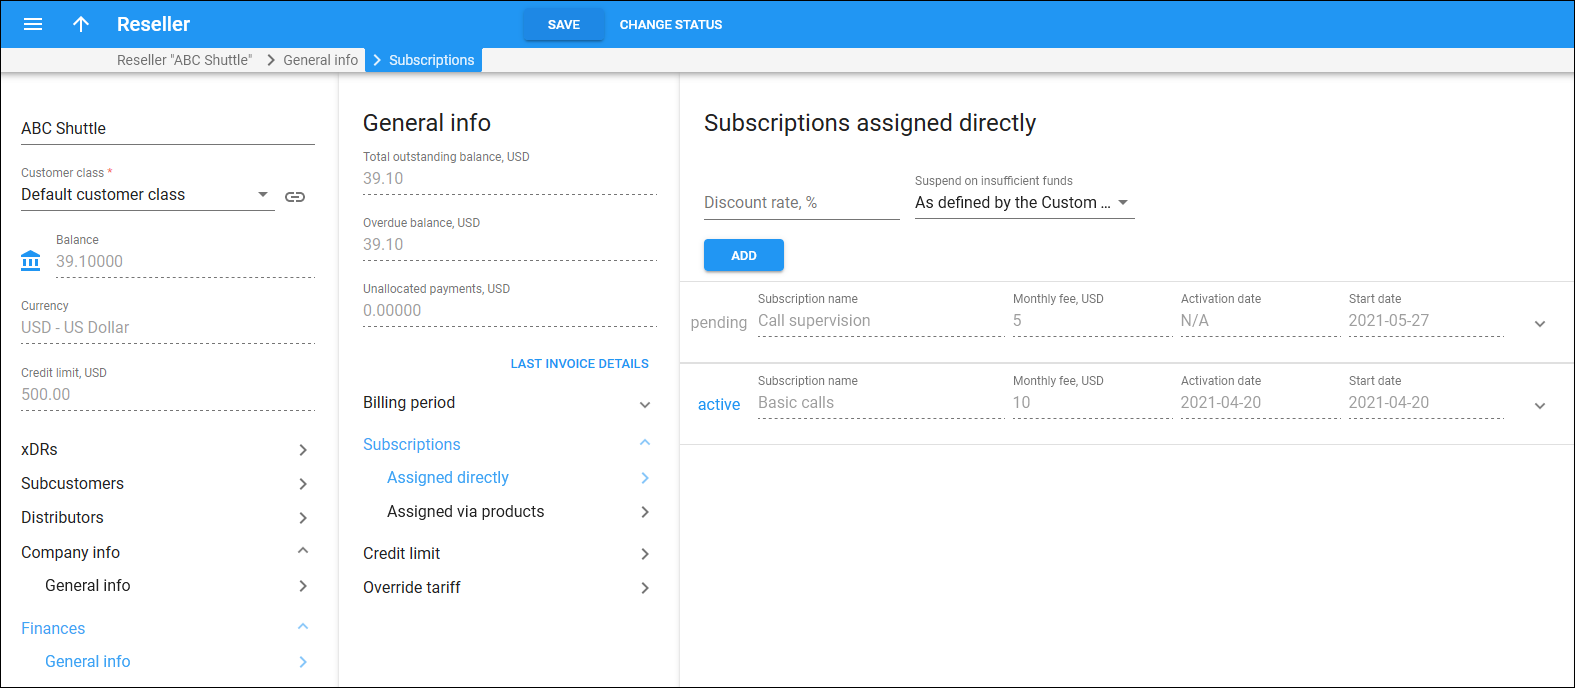 reseller's subscriptions assigned directly